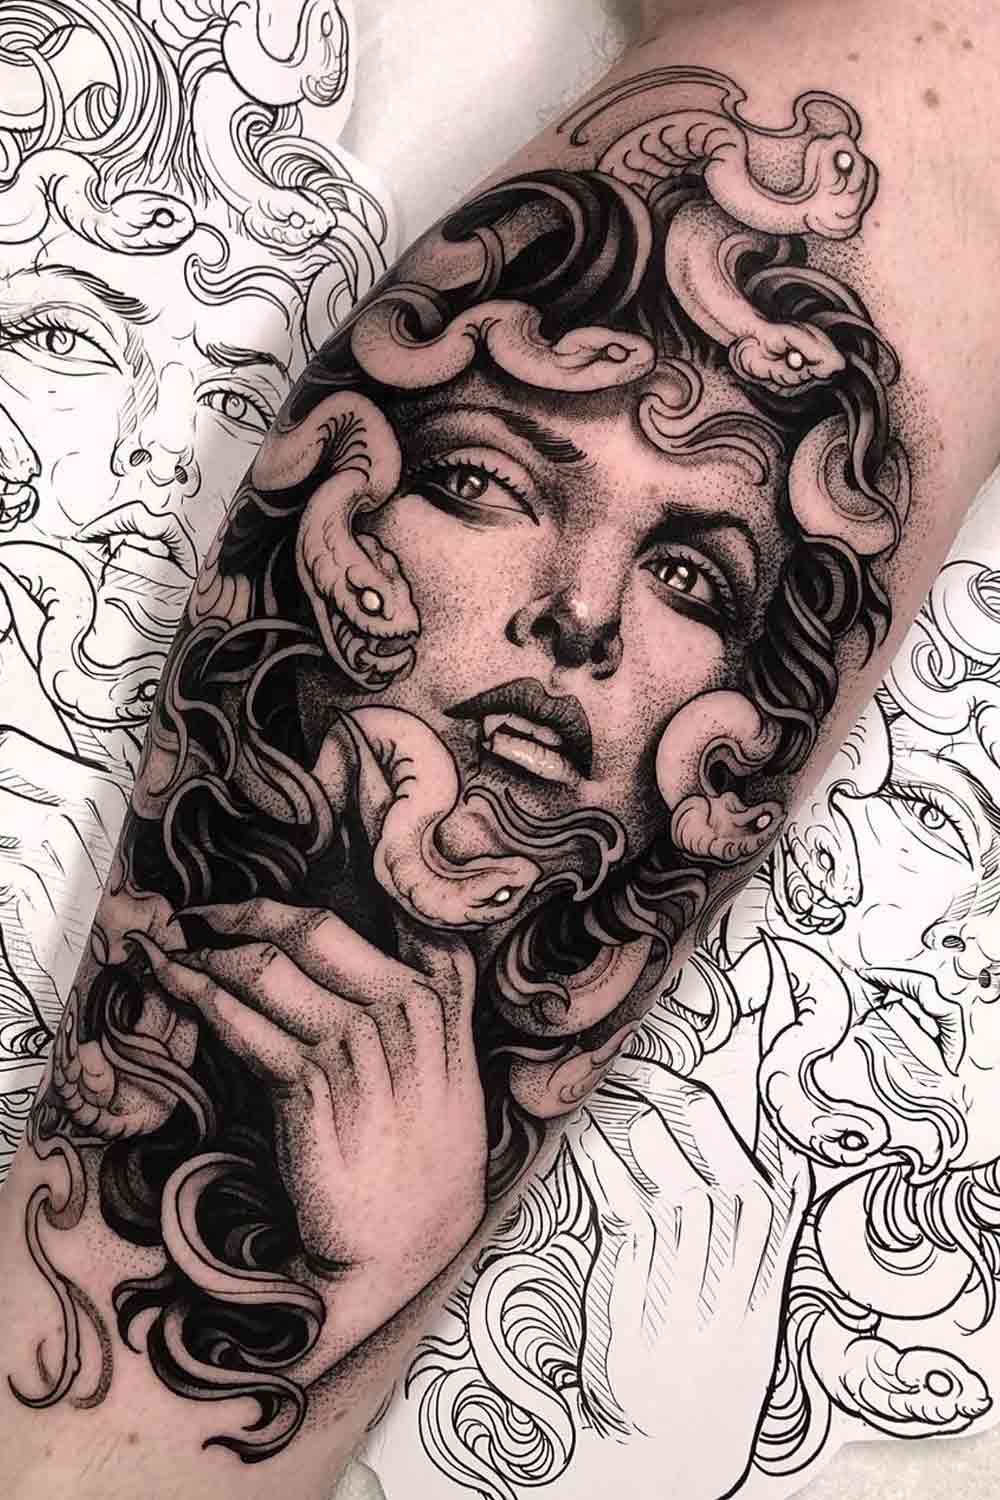 Size and Placement for Medusa Tattoo